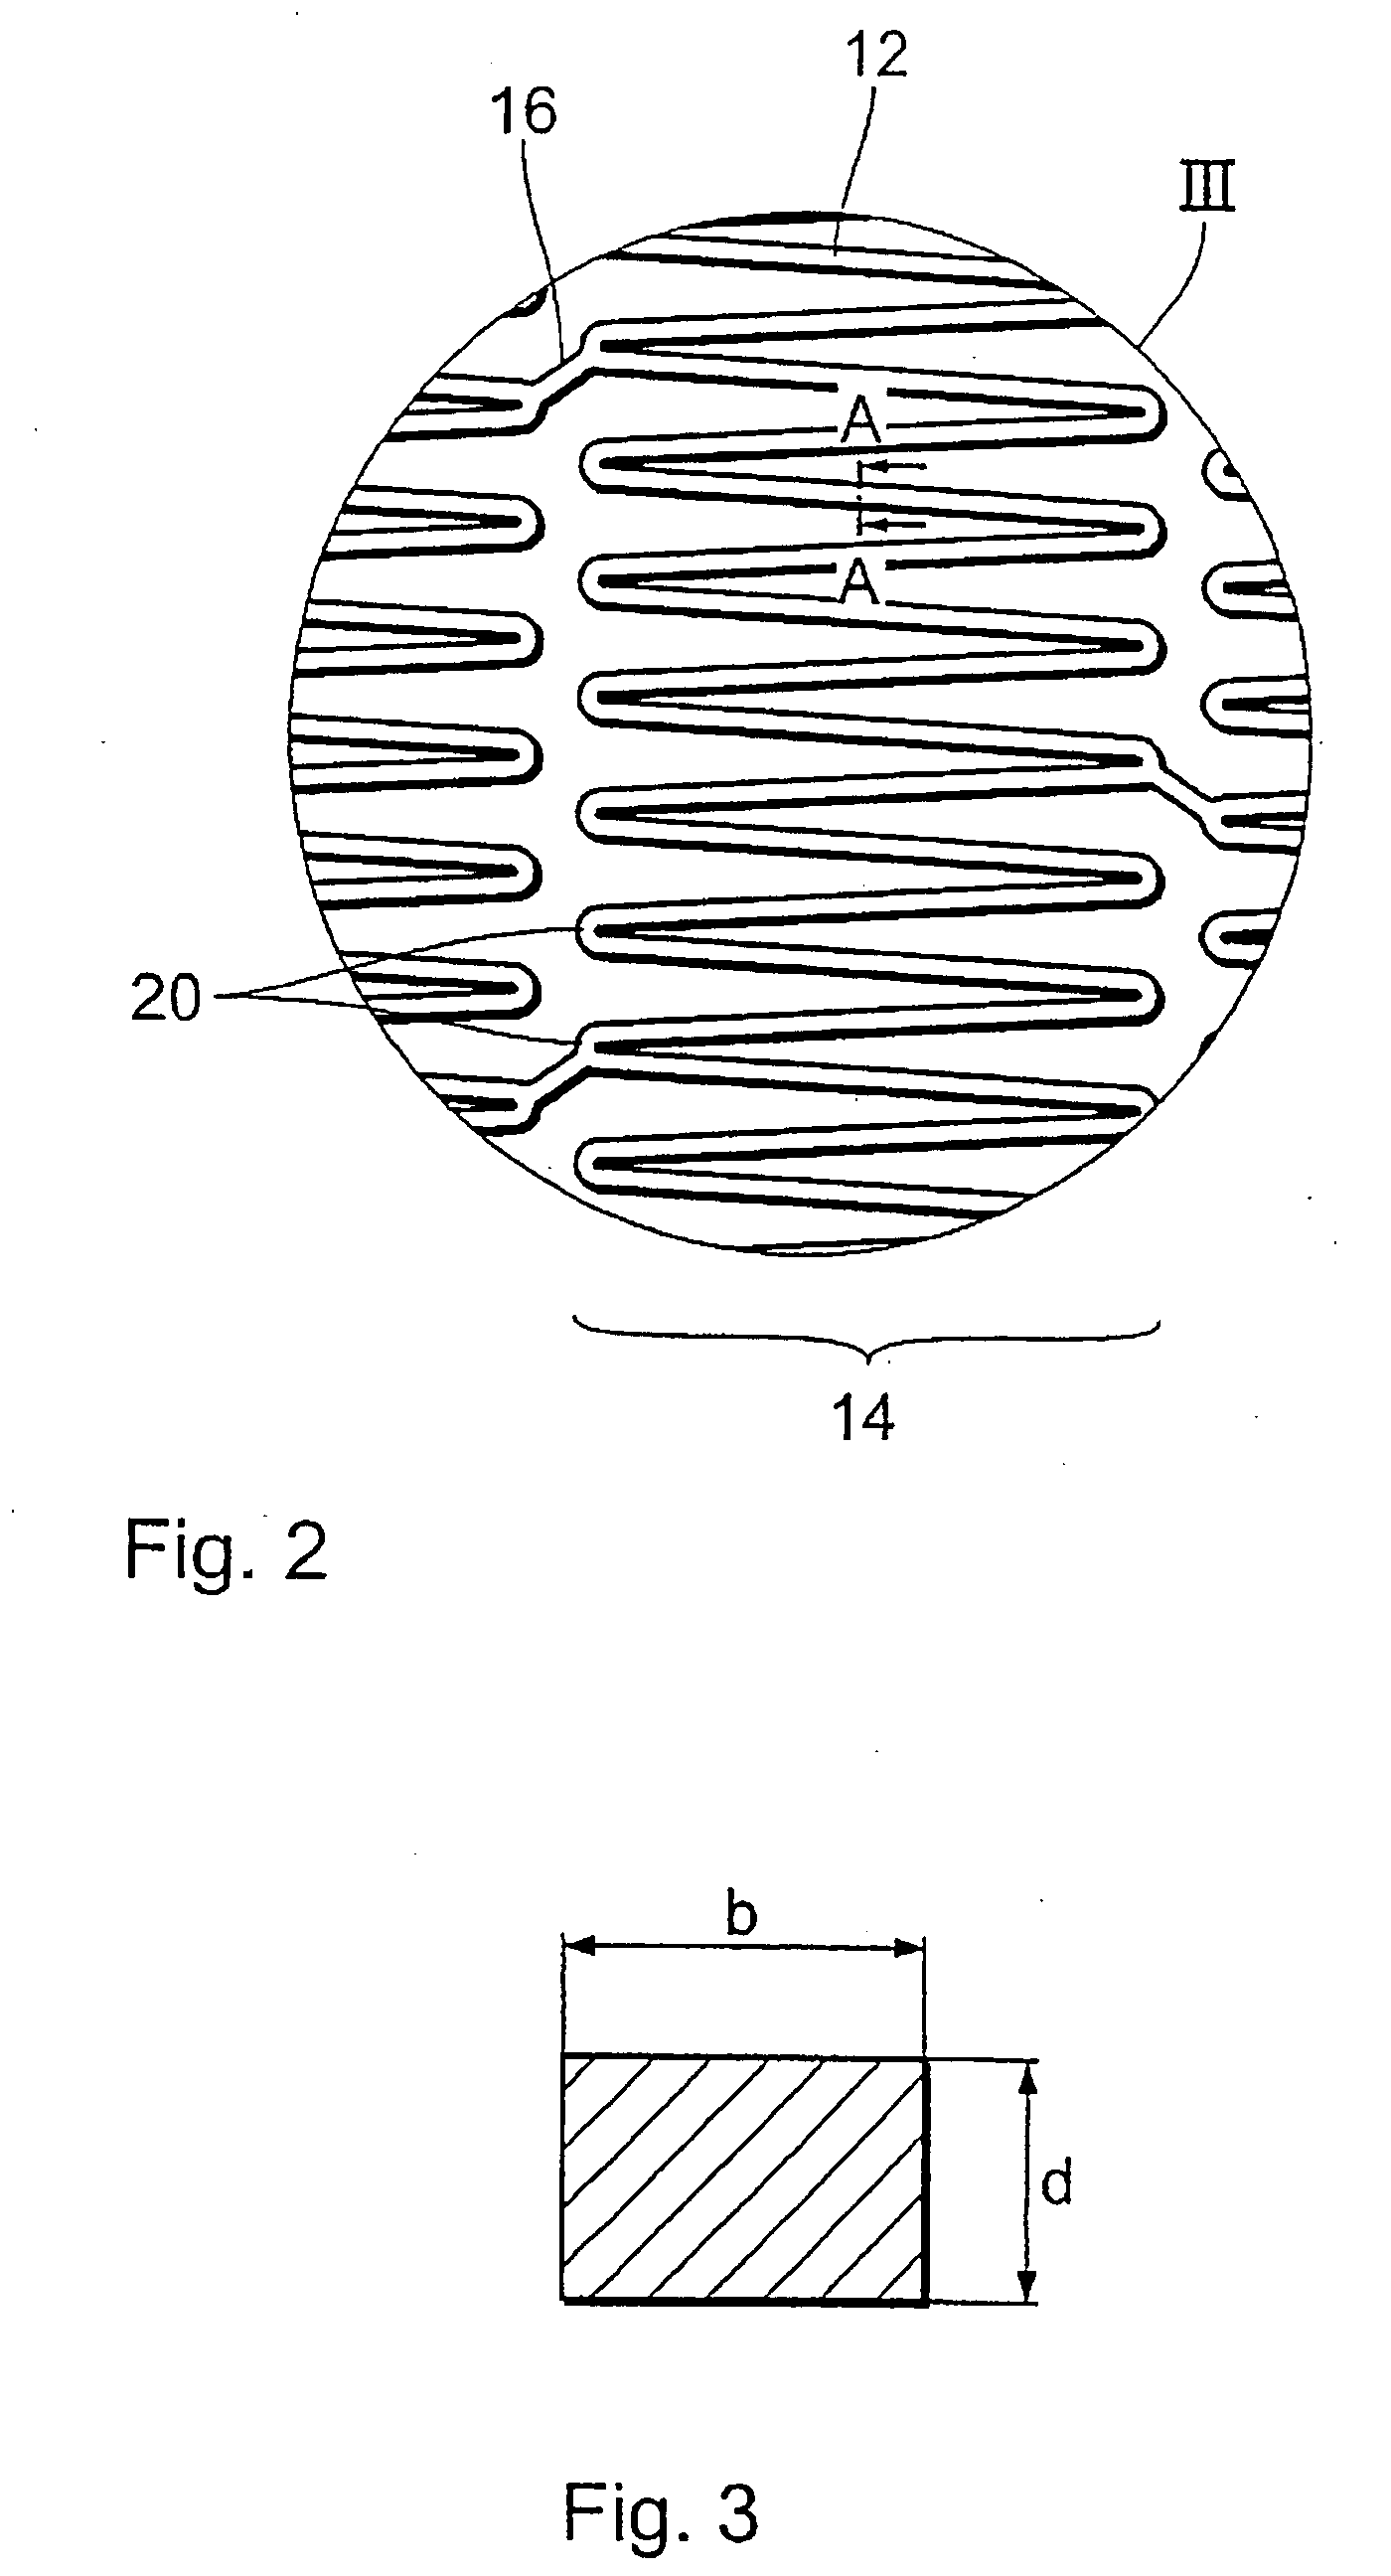 Use of one or more elements from the group containing yttrium, neodymium and zirconium and pharmaceutical compositions containing said elements